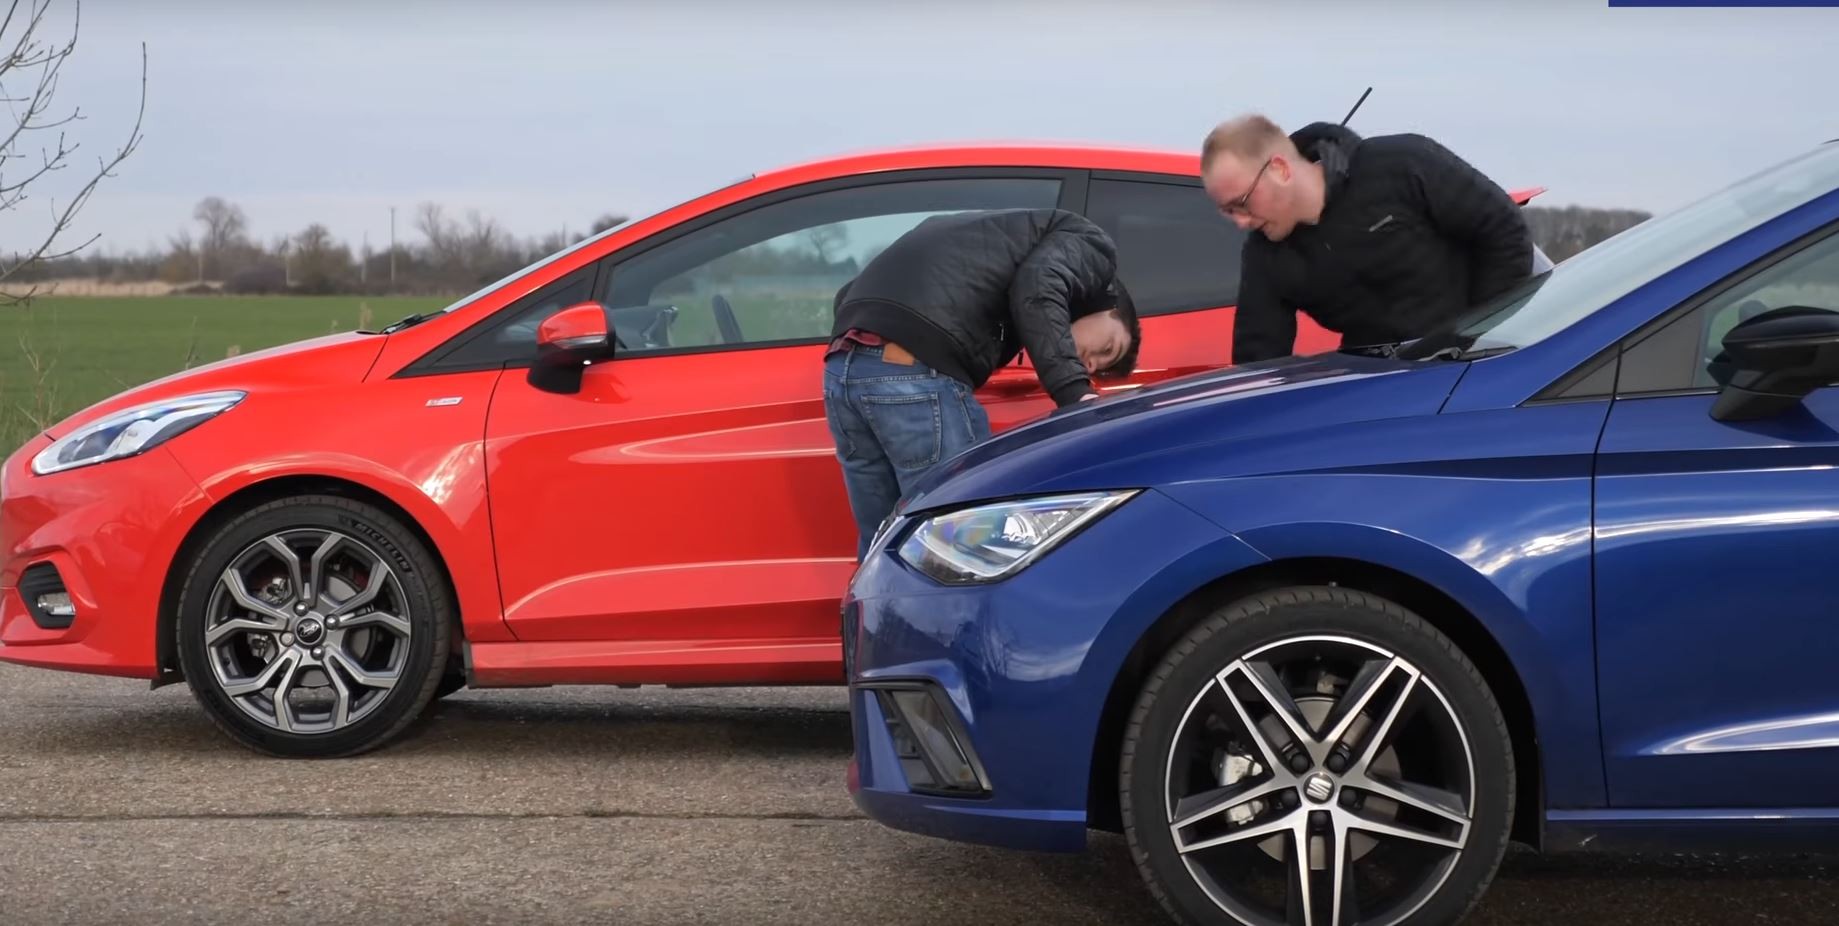 2018 Ford Fiesta Vs Seat Ibiza Which Is The Best Of The Sporty Small